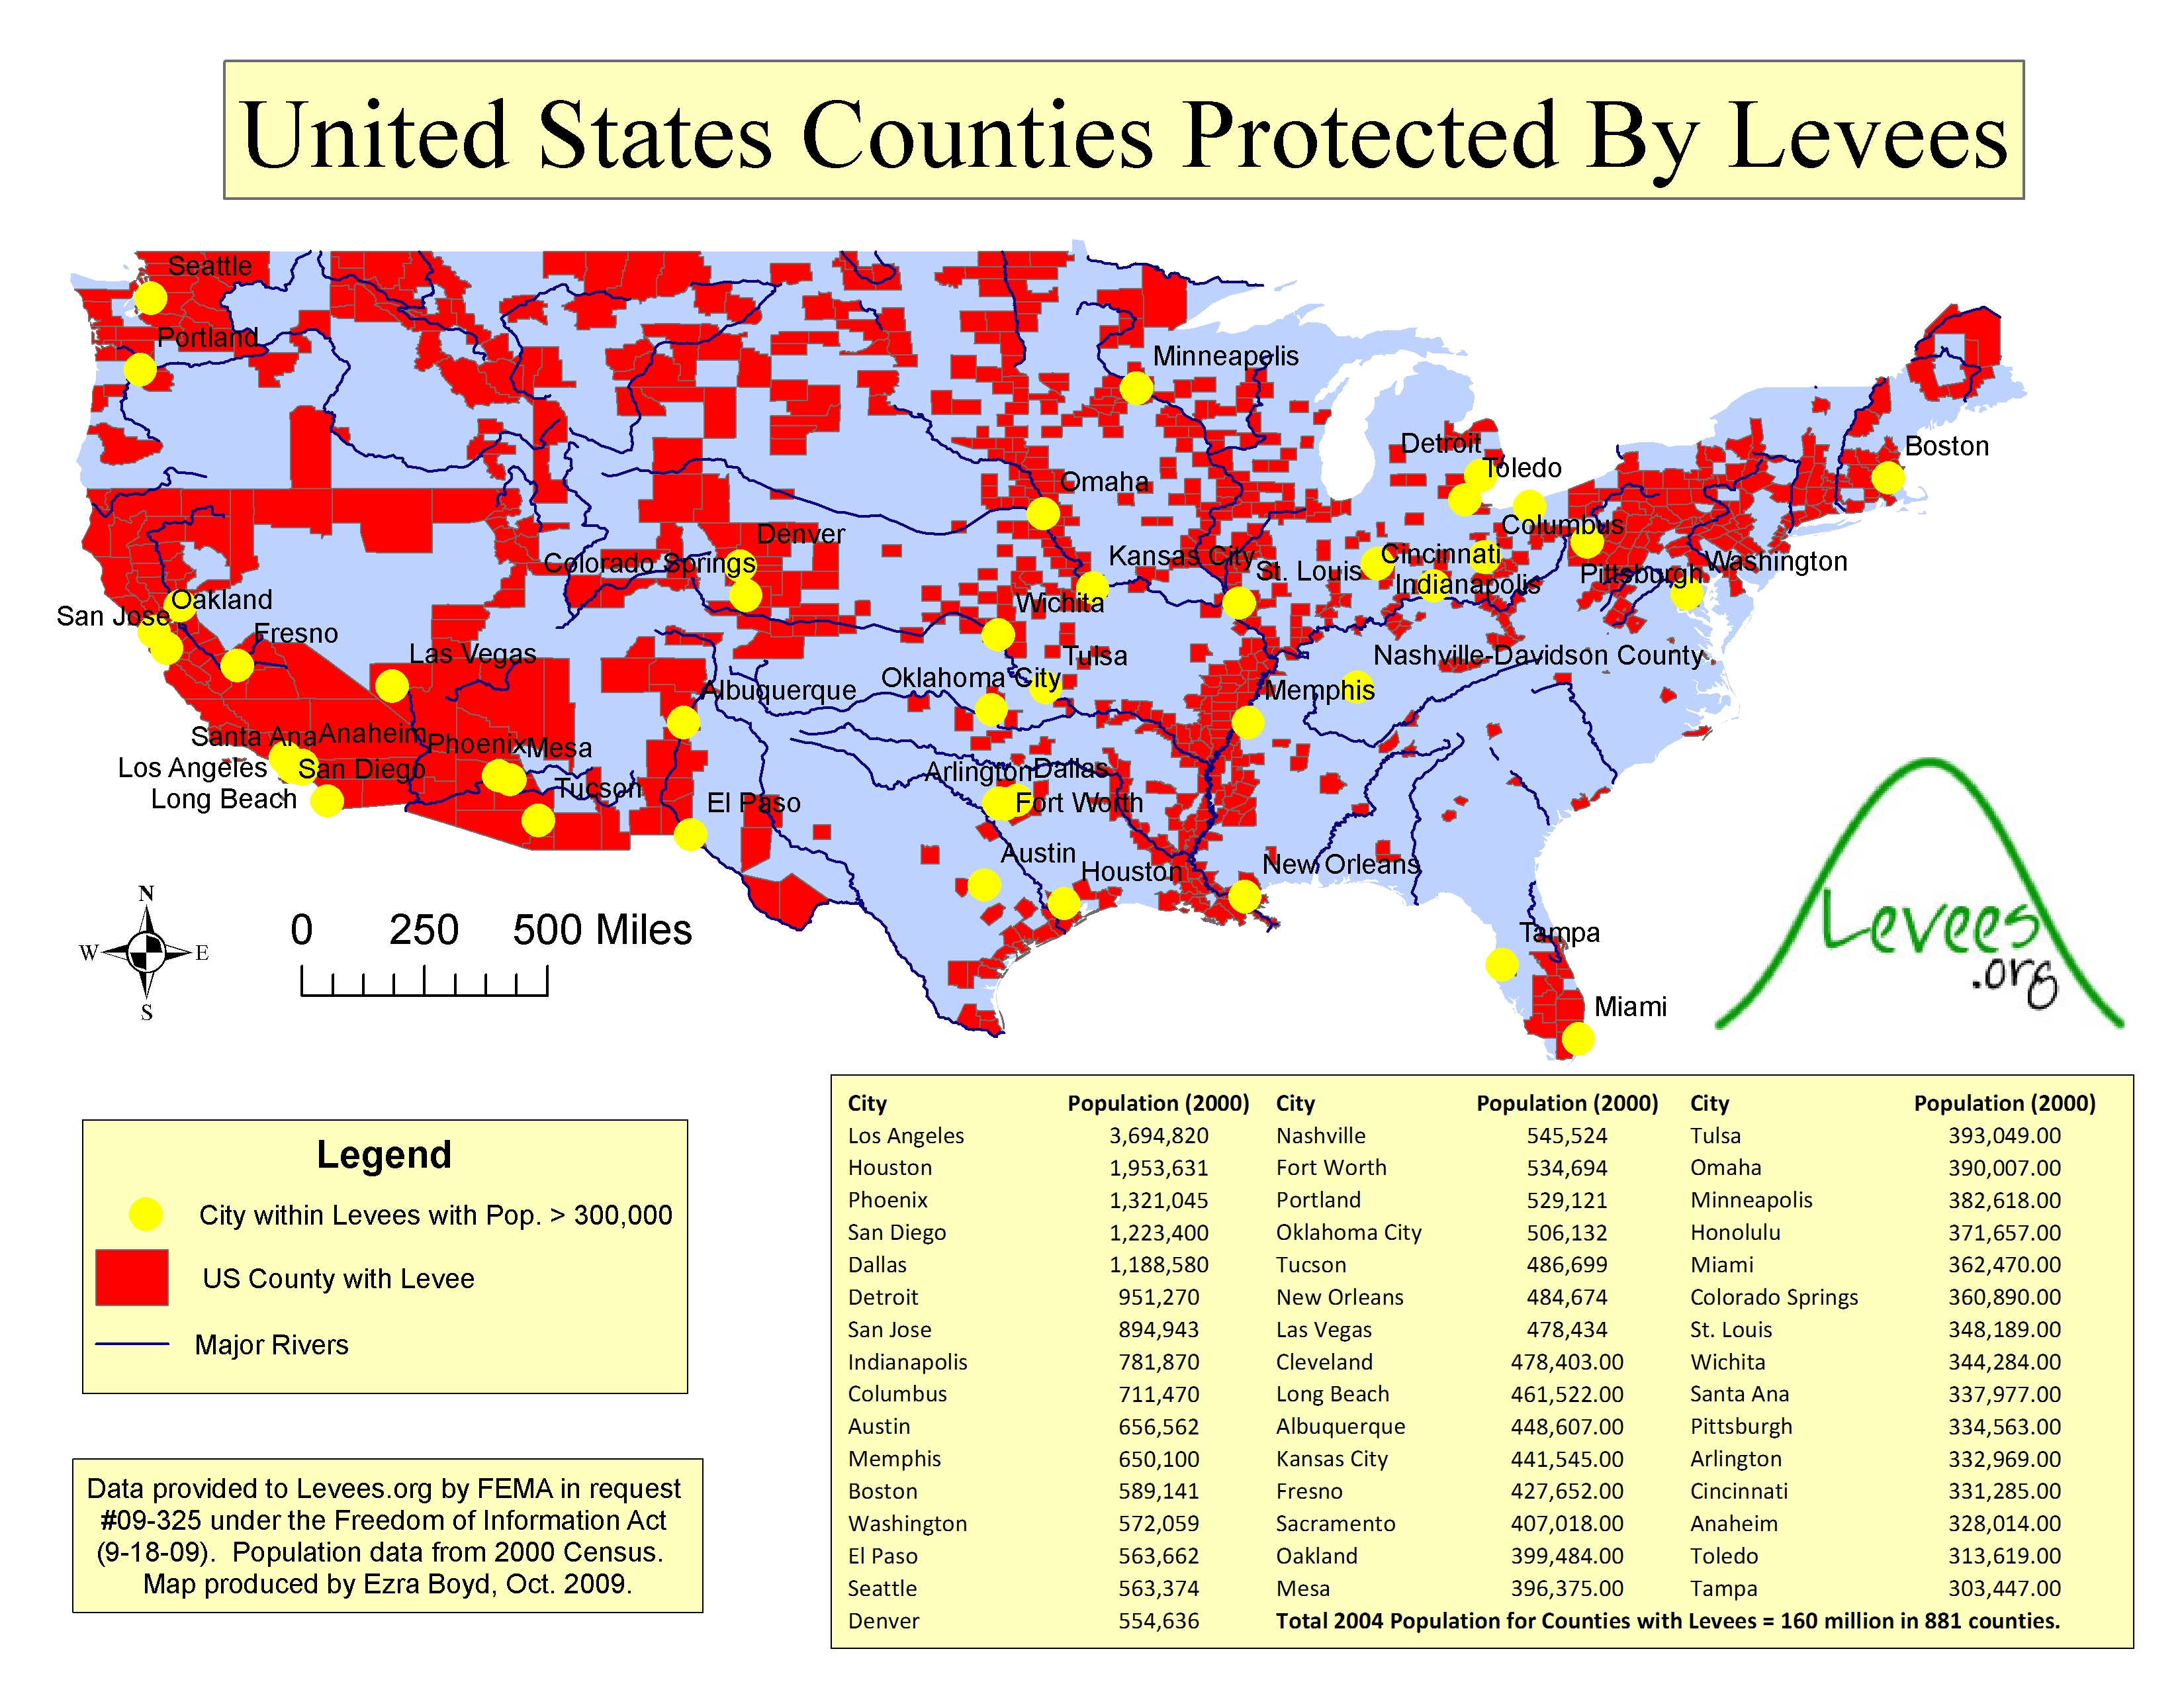 US Counties with levees